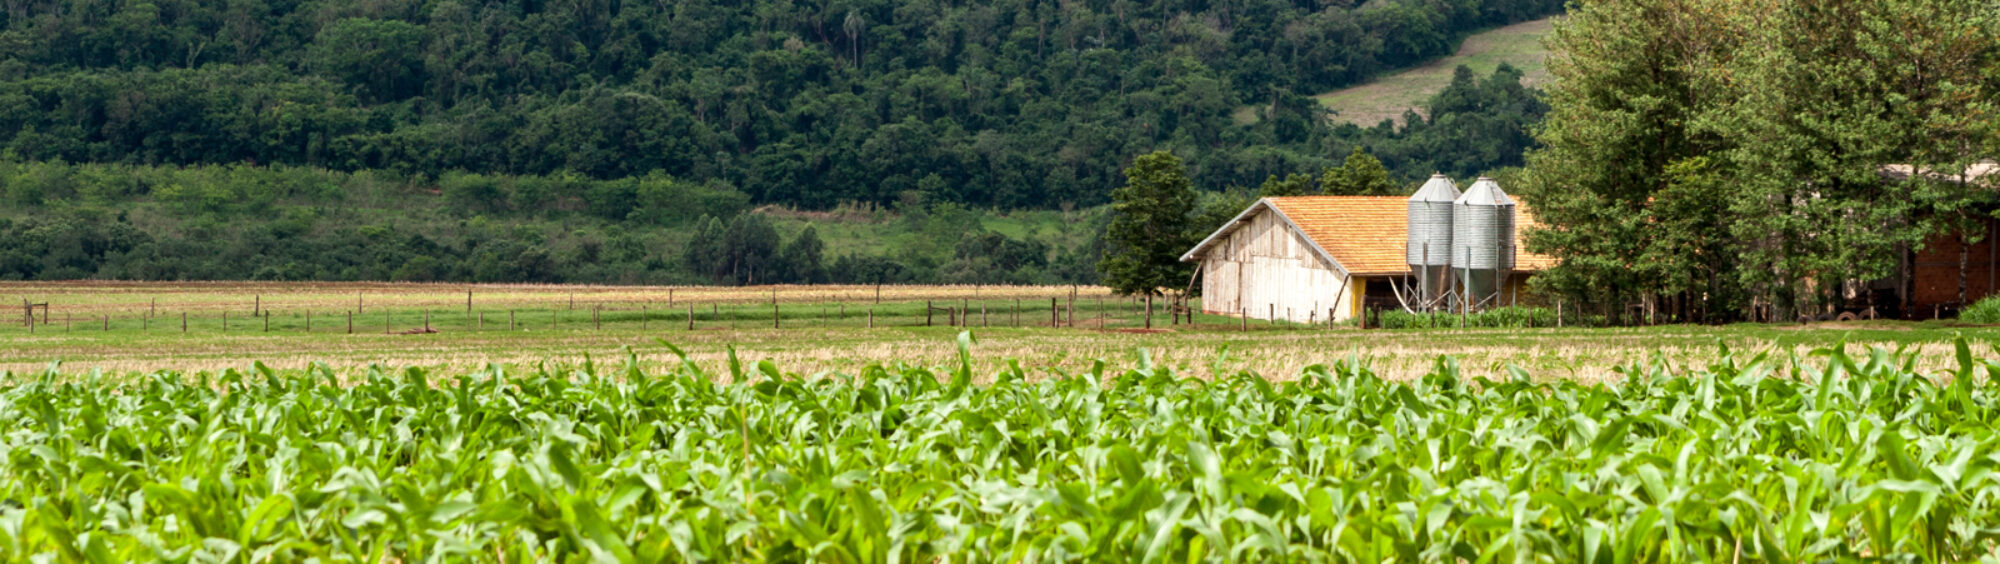 A photo of small silo for grain storage in the background, with blurred corn plantation in the foreground, in Brazil.